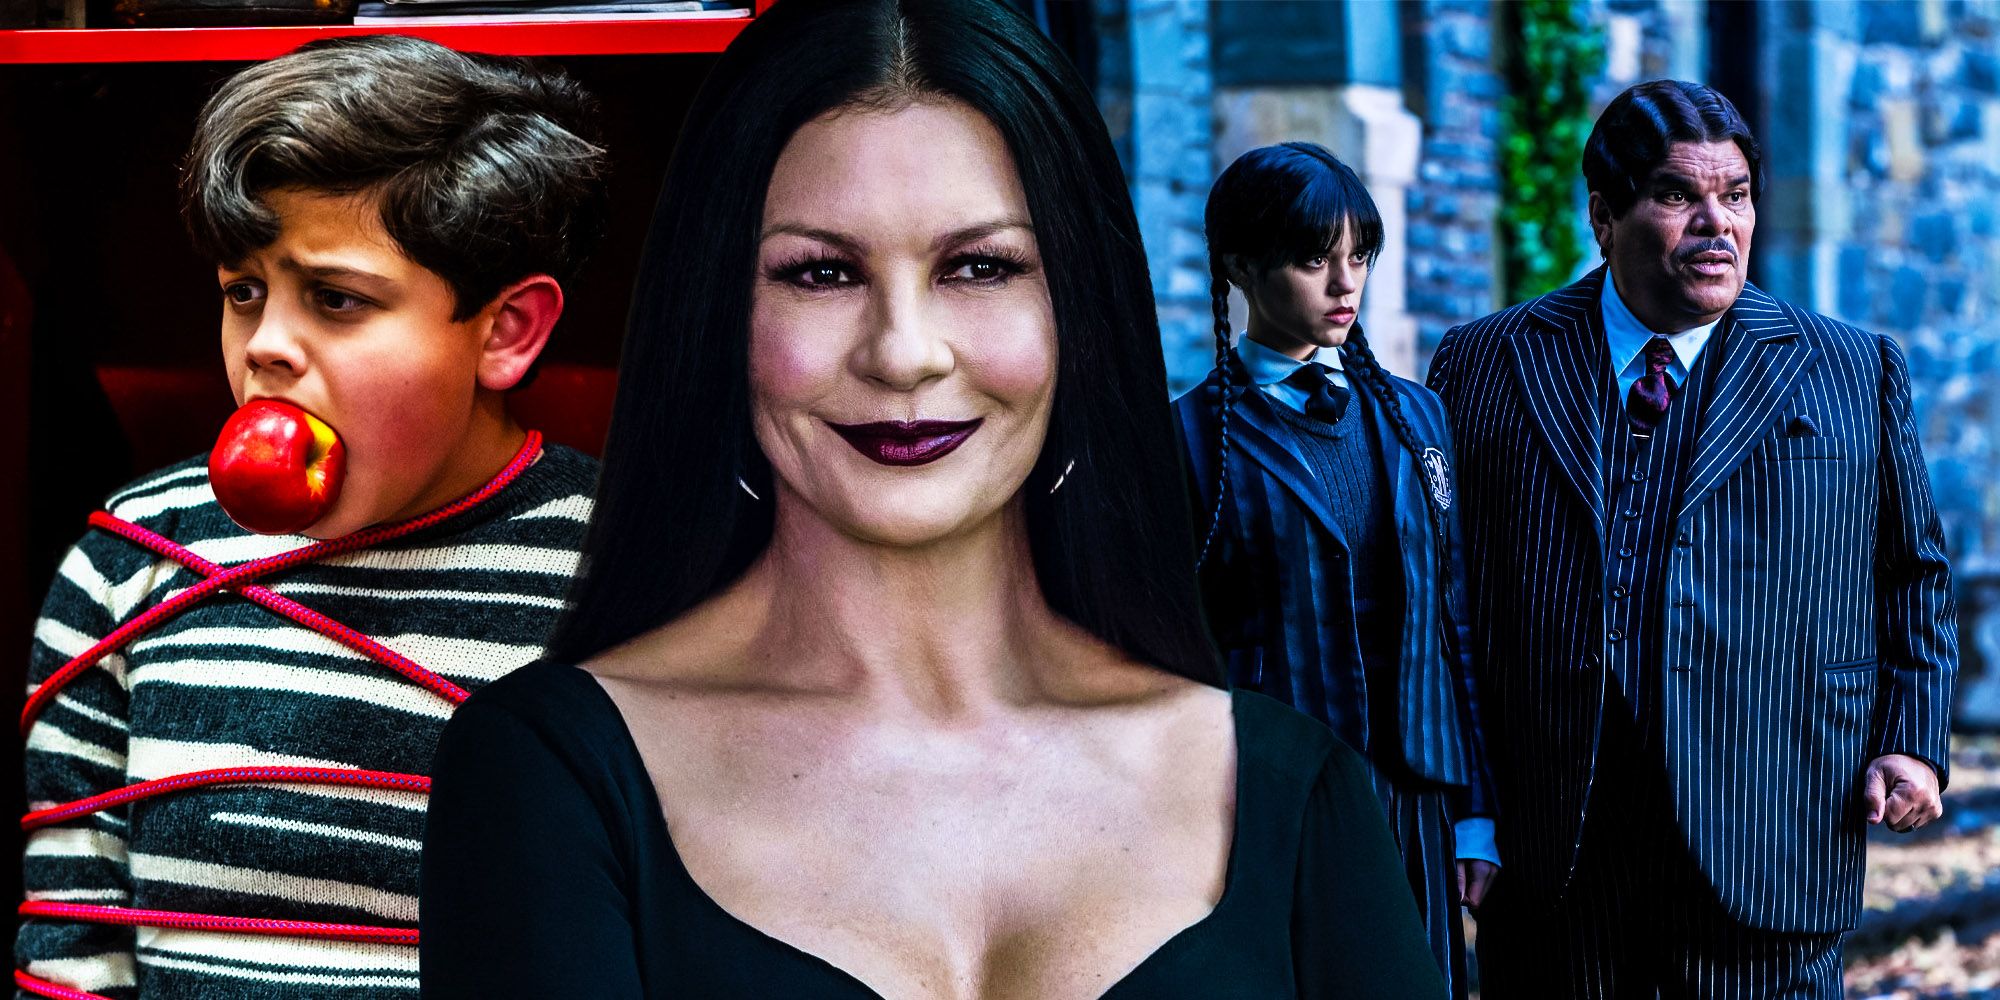 A blended image features Pugsley, Morticia, Wednesday, and Gomez Addams as they appear in the Netflix series Wednesday season 1